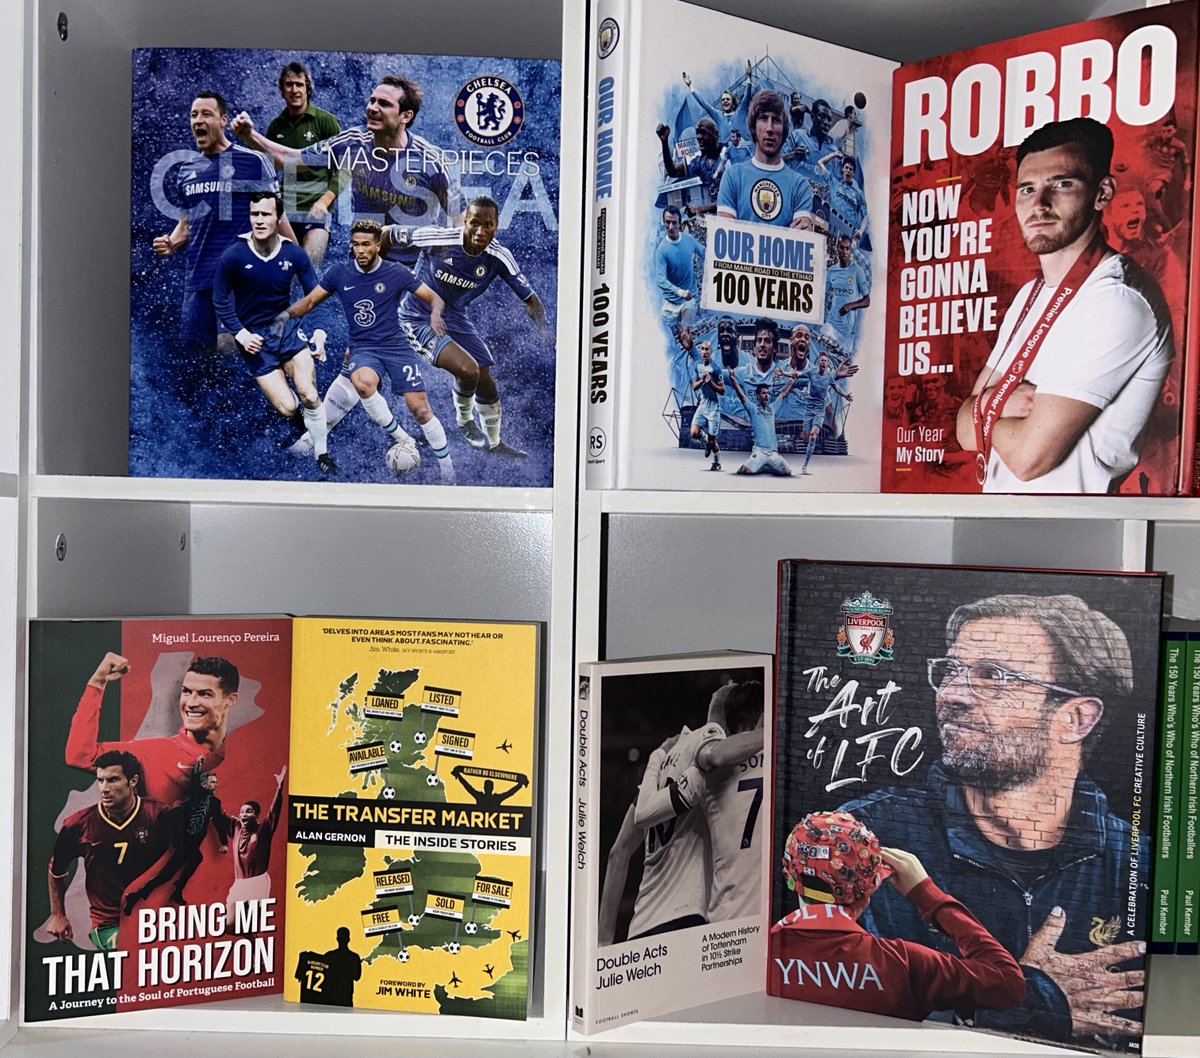 *TOP PICKS* This Weeks Top Picks! Get your books here!👇⚽️ soccer-books.co.uk/collections/ne… @PitchPublishing @reach_sport @IanRidley1 @FDpublishing @DameJulieWelch @TheLiverpolitan @Miguel_LPereira @JimWhite @AlanGernon #spurs #LFC #ChelseaFC #MCFC